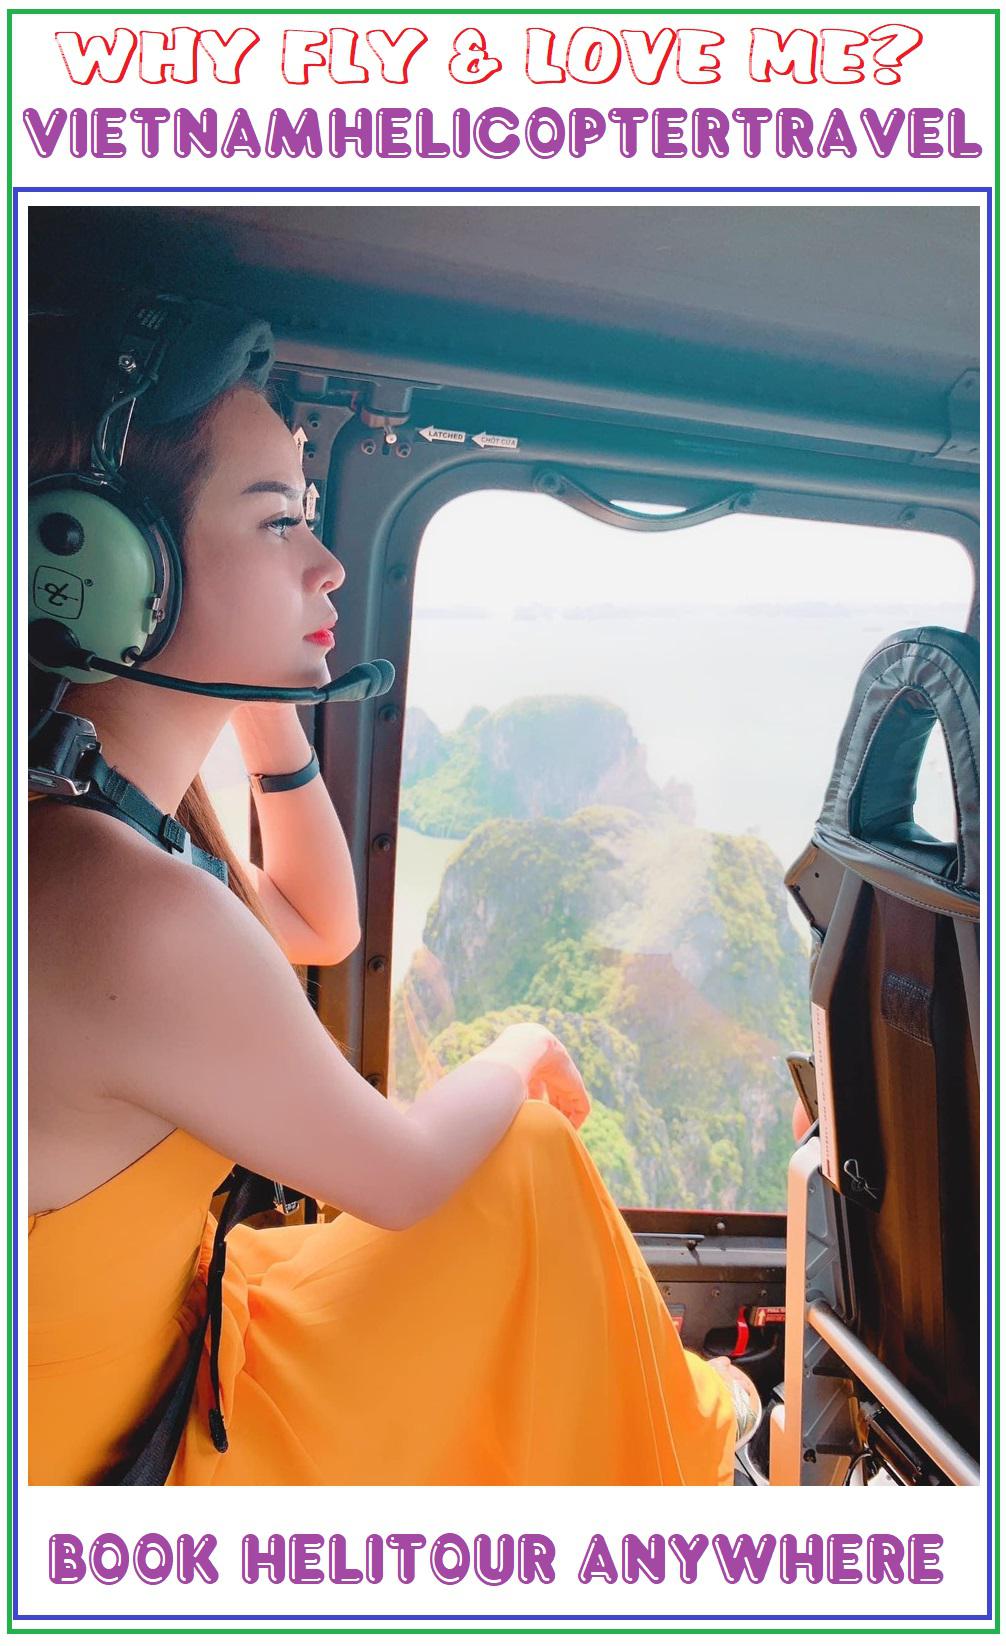 Amazing Helicopter Tour to Ha Long Bay